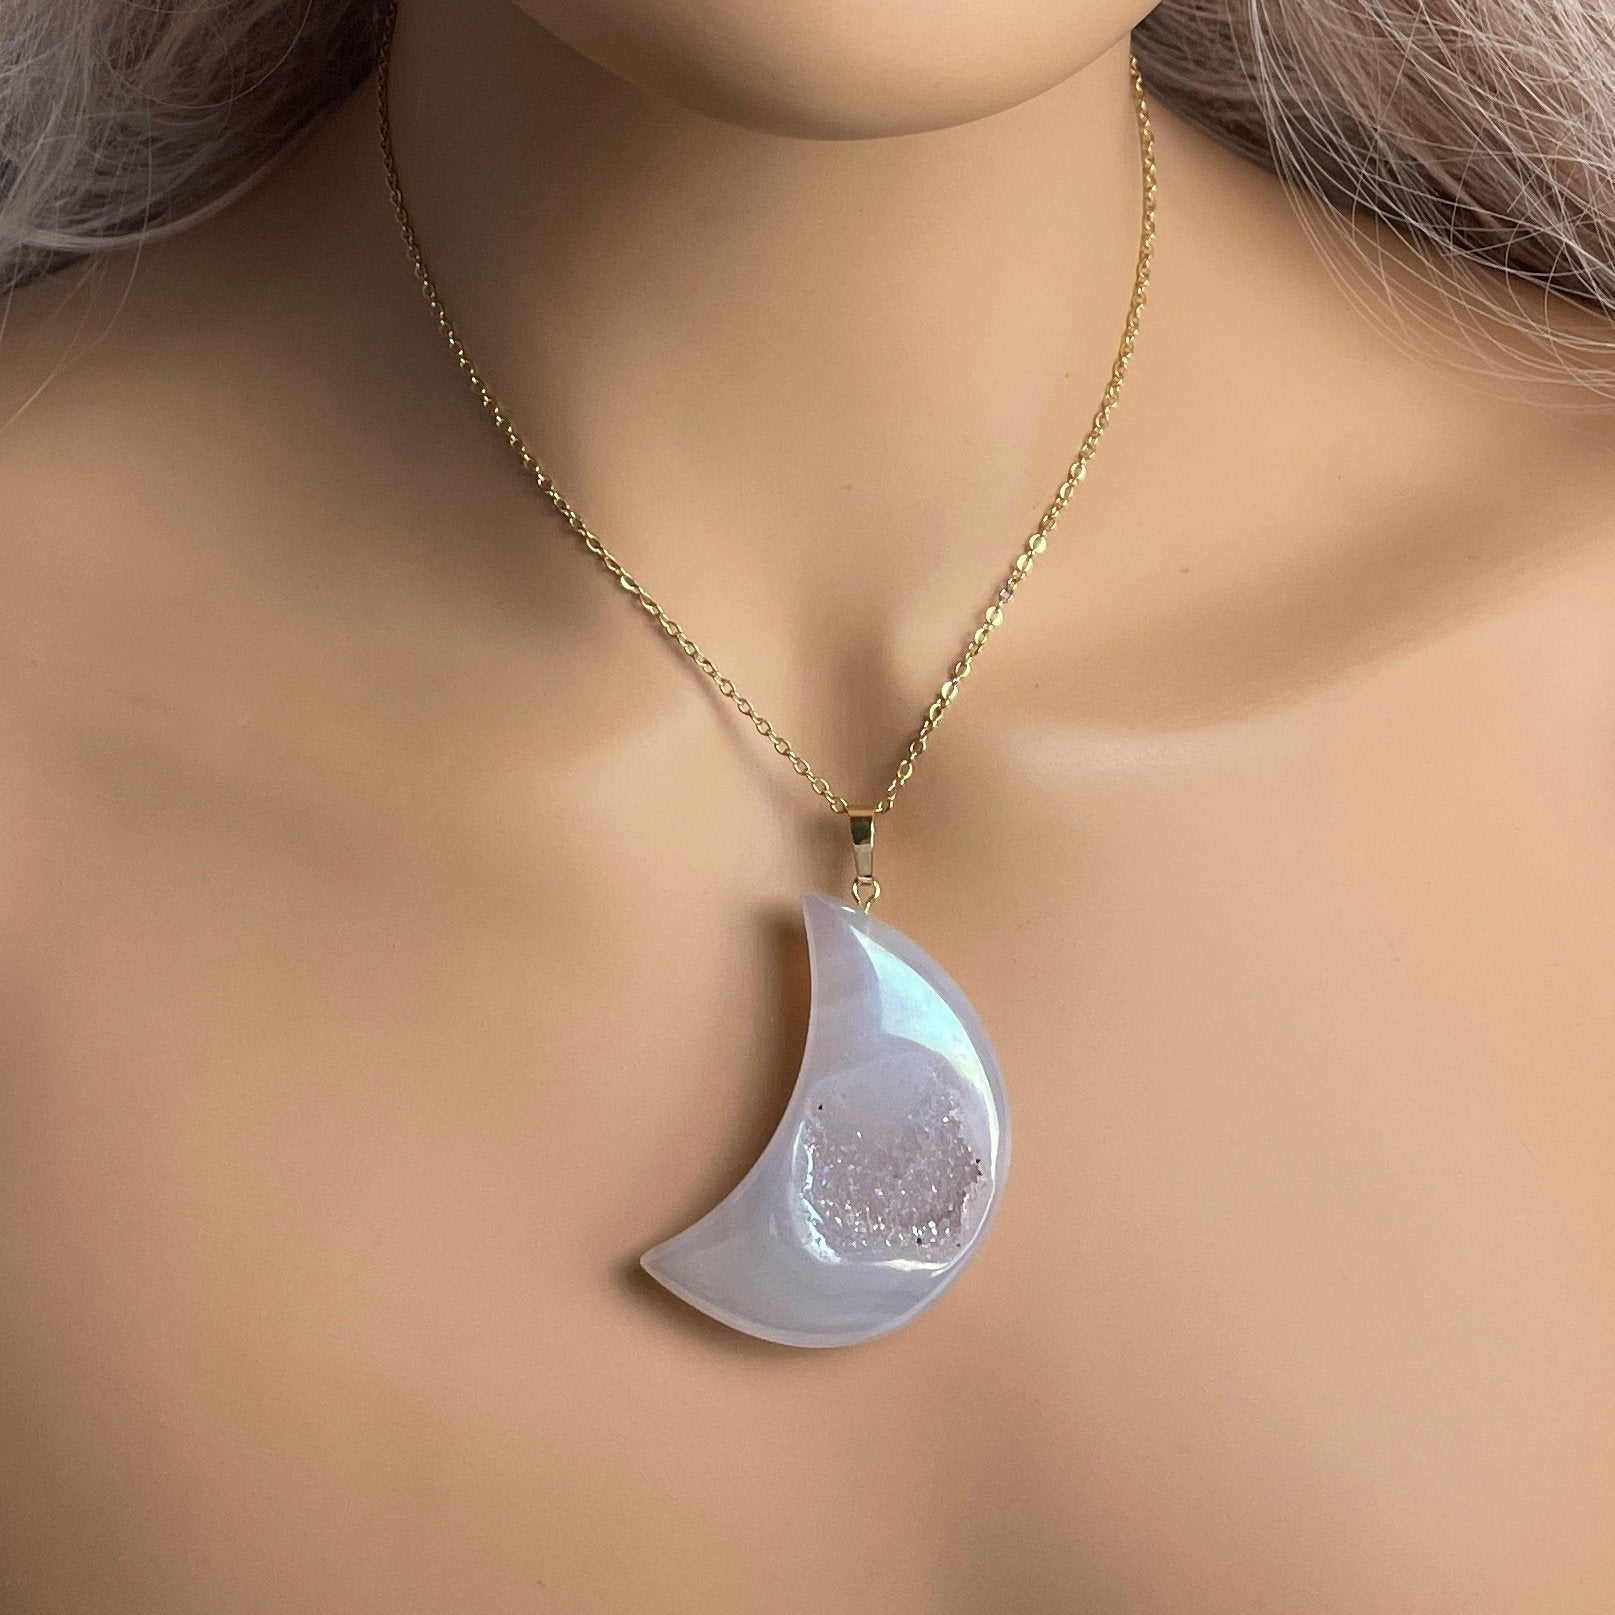 Aura Quartz Geode Necklace Gold, Unique Iridescent Crescent Moon Crystal Jewelry Boho, Gift For Her, M7-63